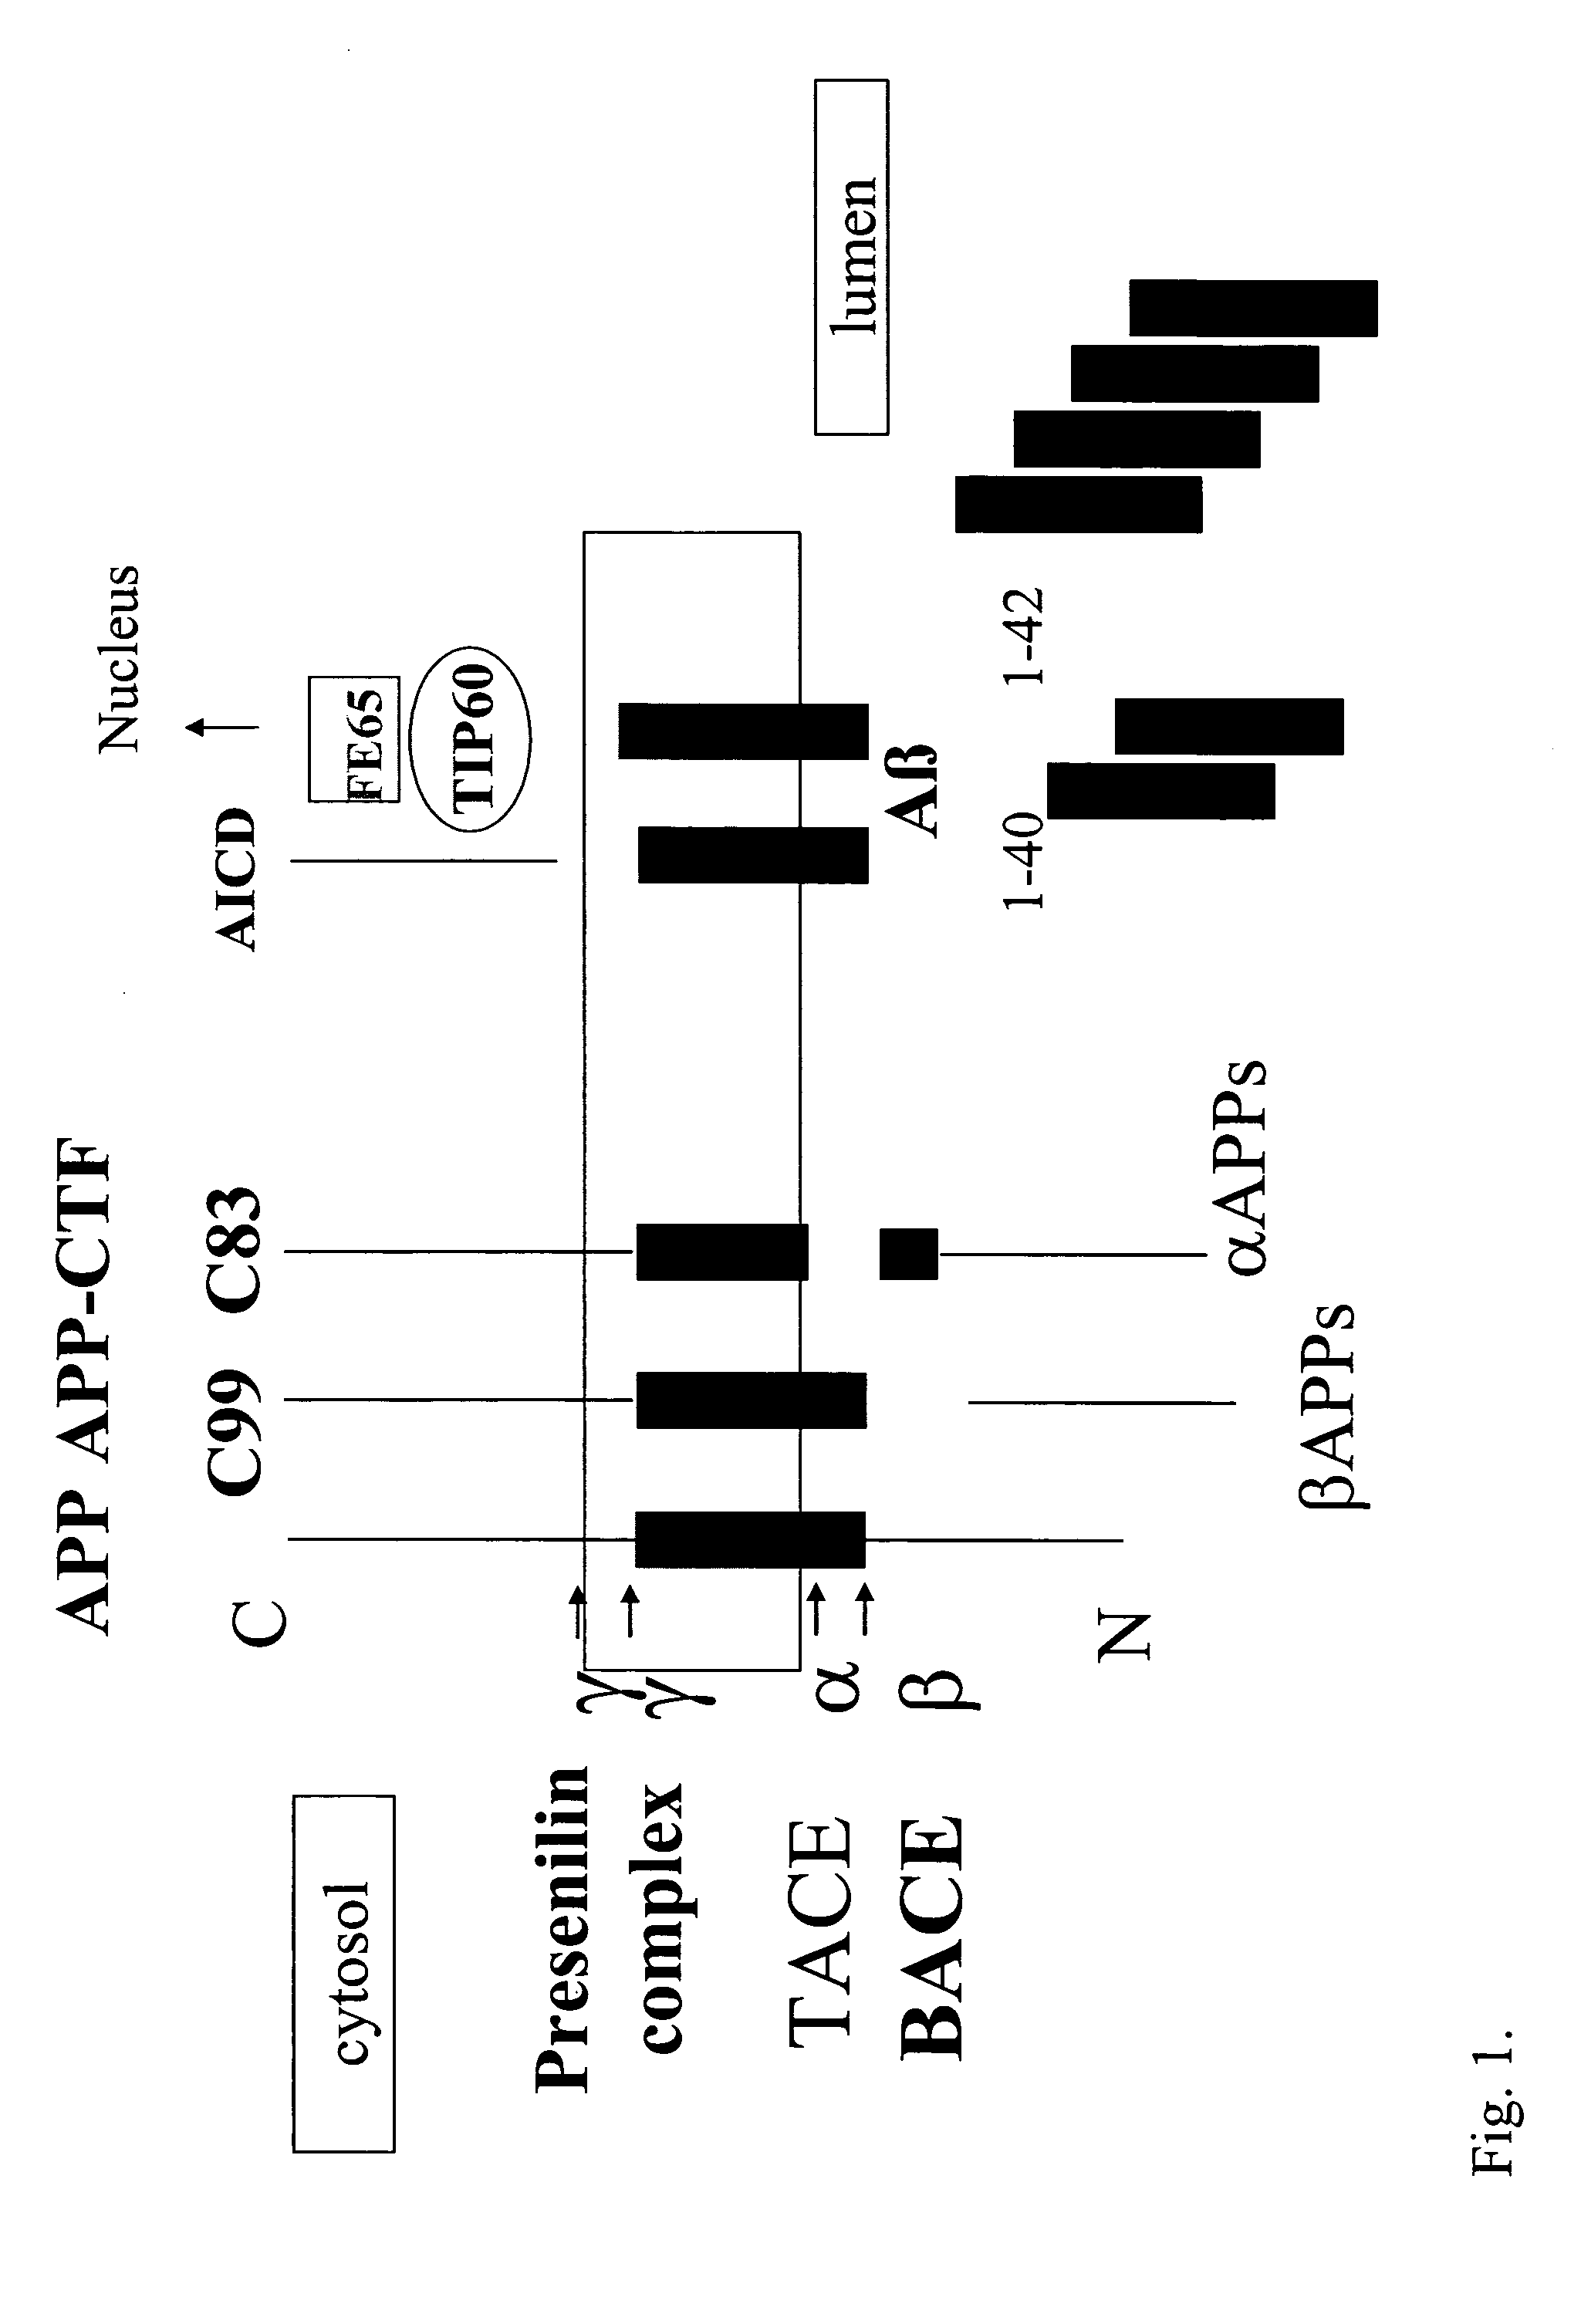 Methods for identifying compounds that modulate stabilization of secretase-associated proteins